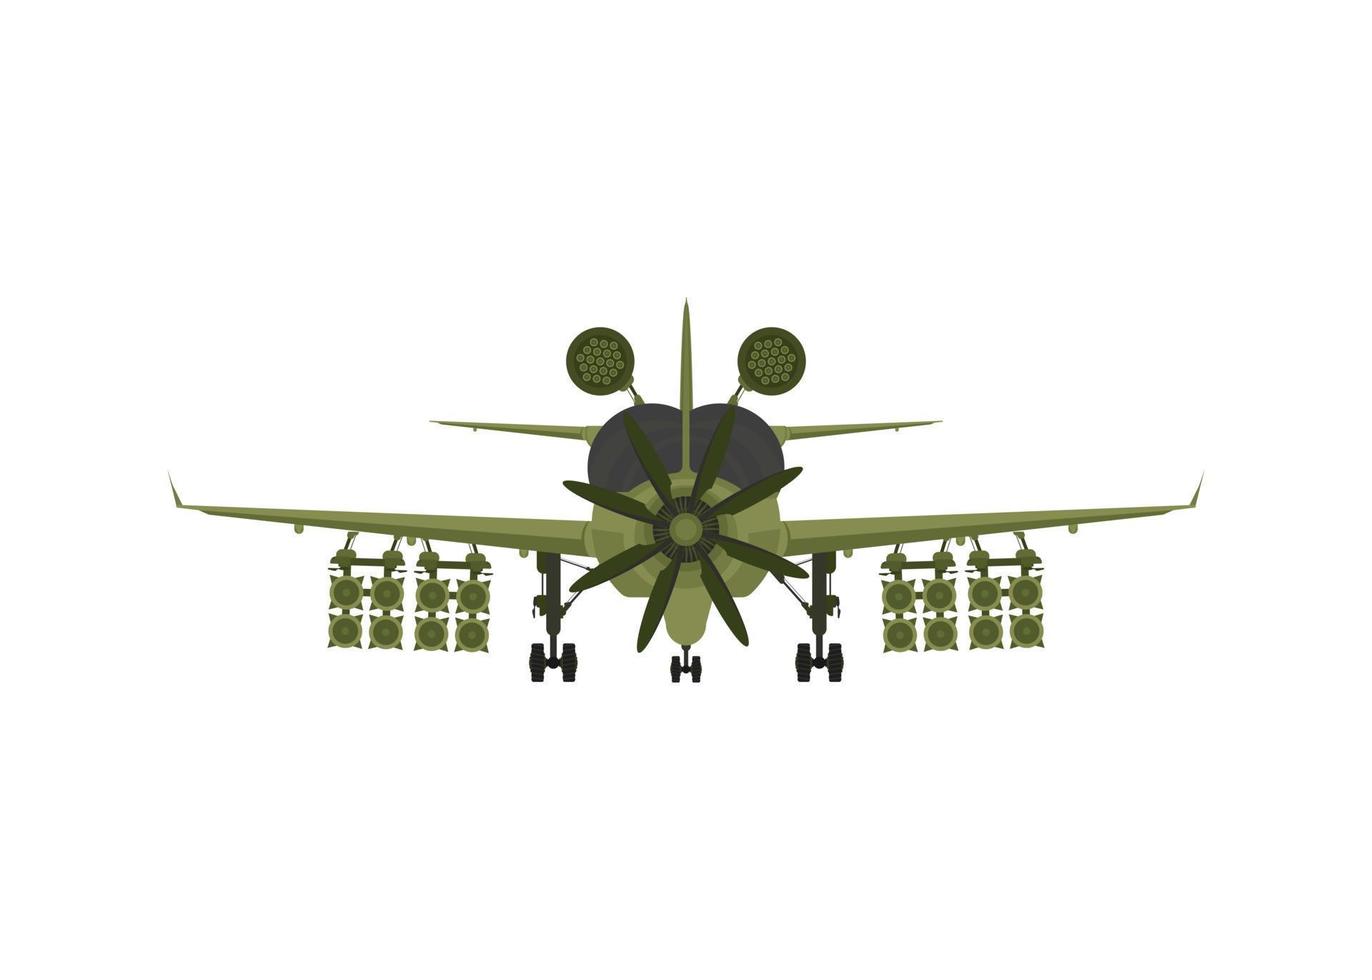 Fighter, military aircraft with missiles on board. Illustration isolated on white background. Vector illustration